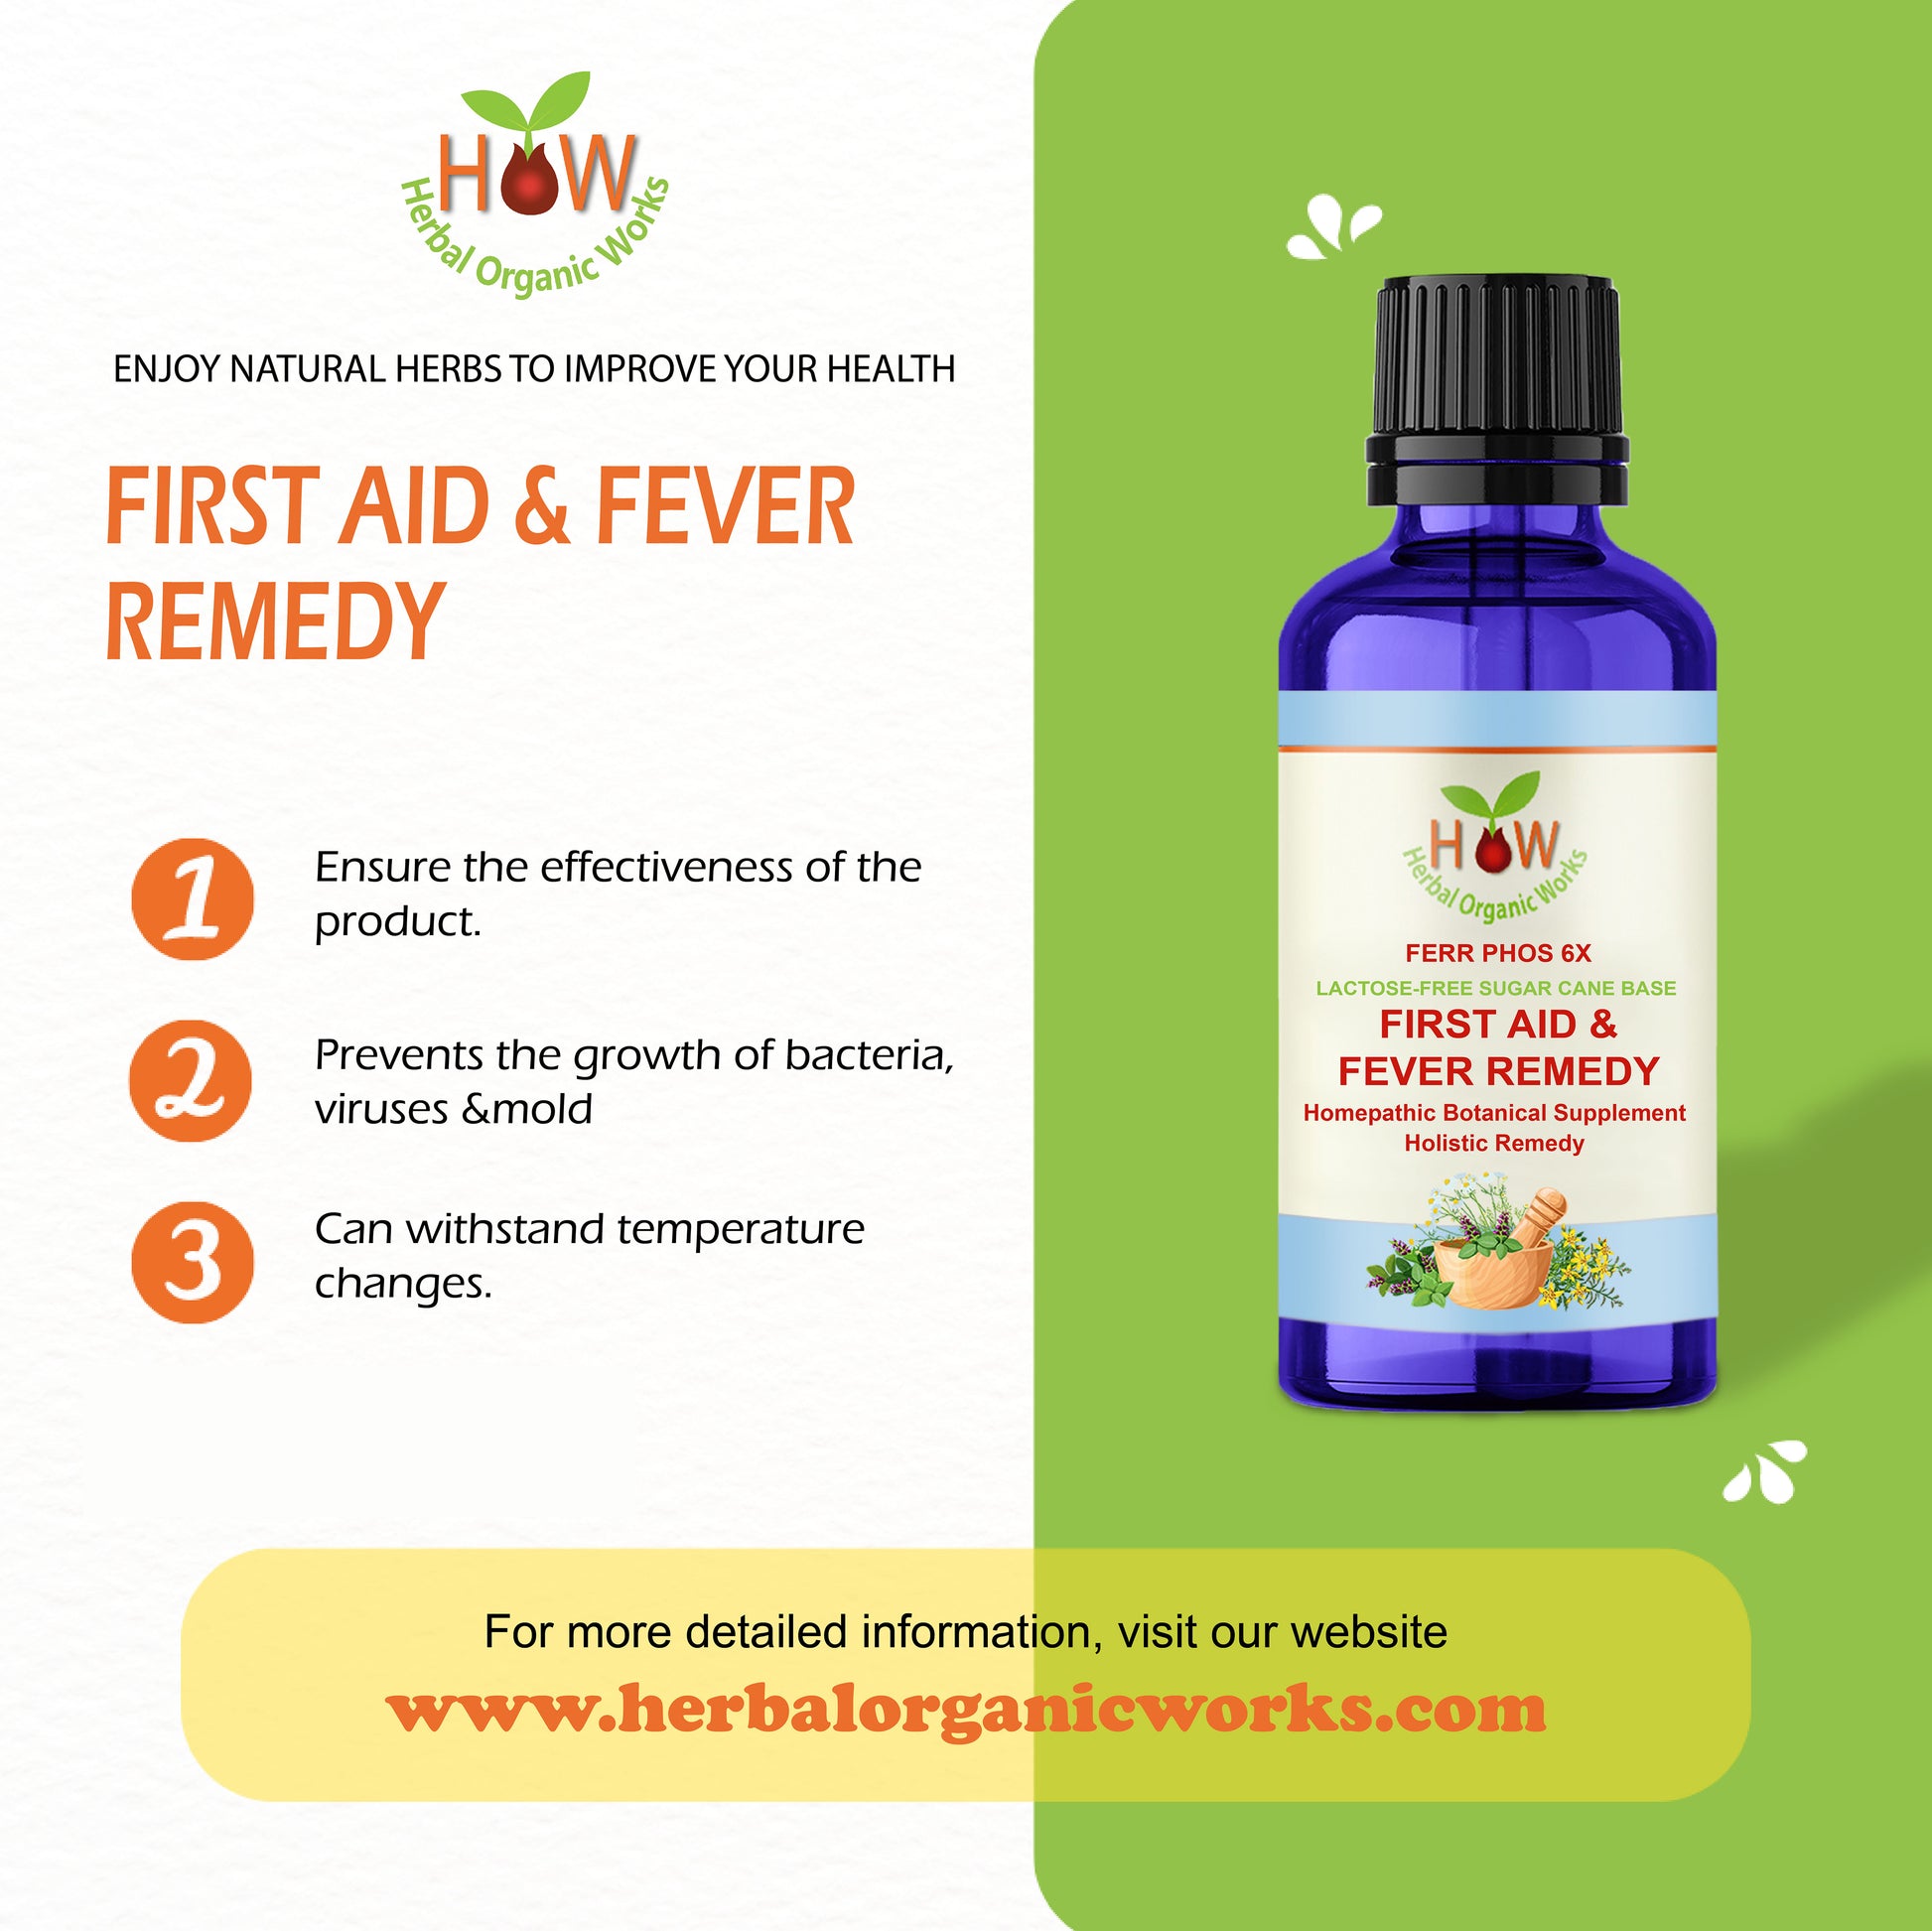 LACTOSE FREE FIRST AID AND FEVER REMEDY 6x